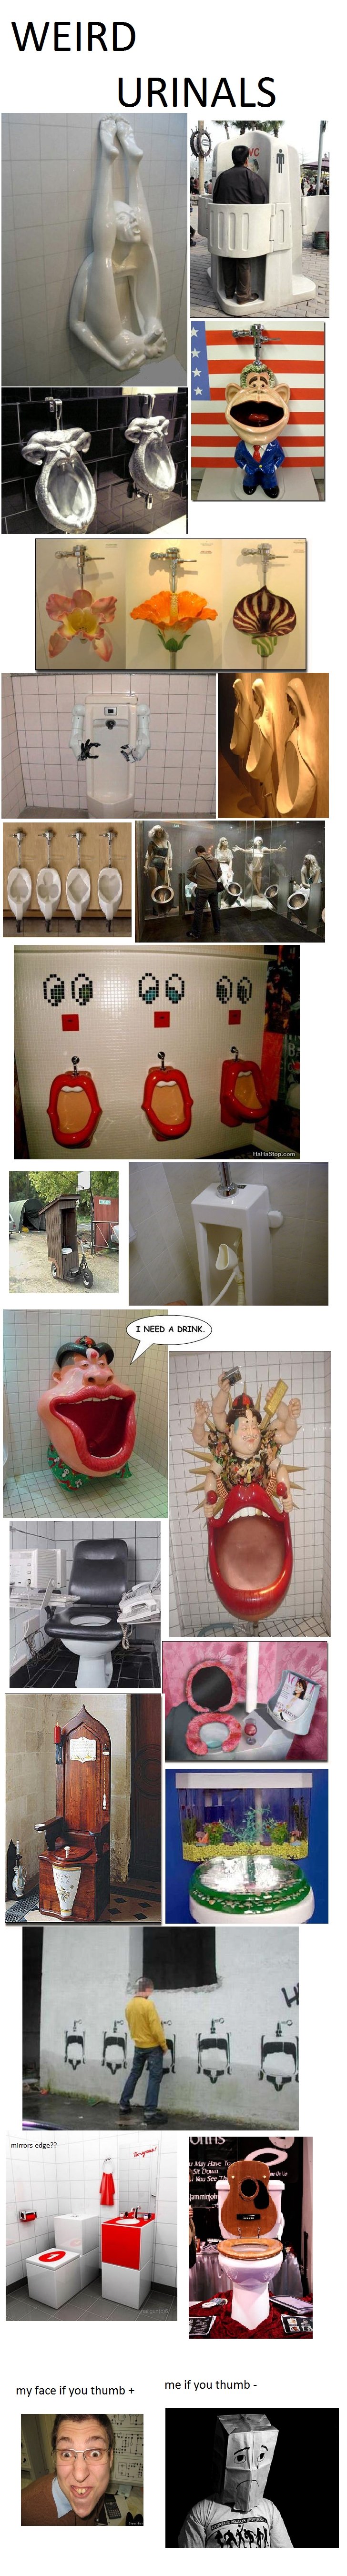 Weird urinals and toilets. plz thumb! ^^. I NEED A DRINK. thumba mew/ ” thumb-. the first pic is the first female urinal just jump on and you'll be fine, ladies